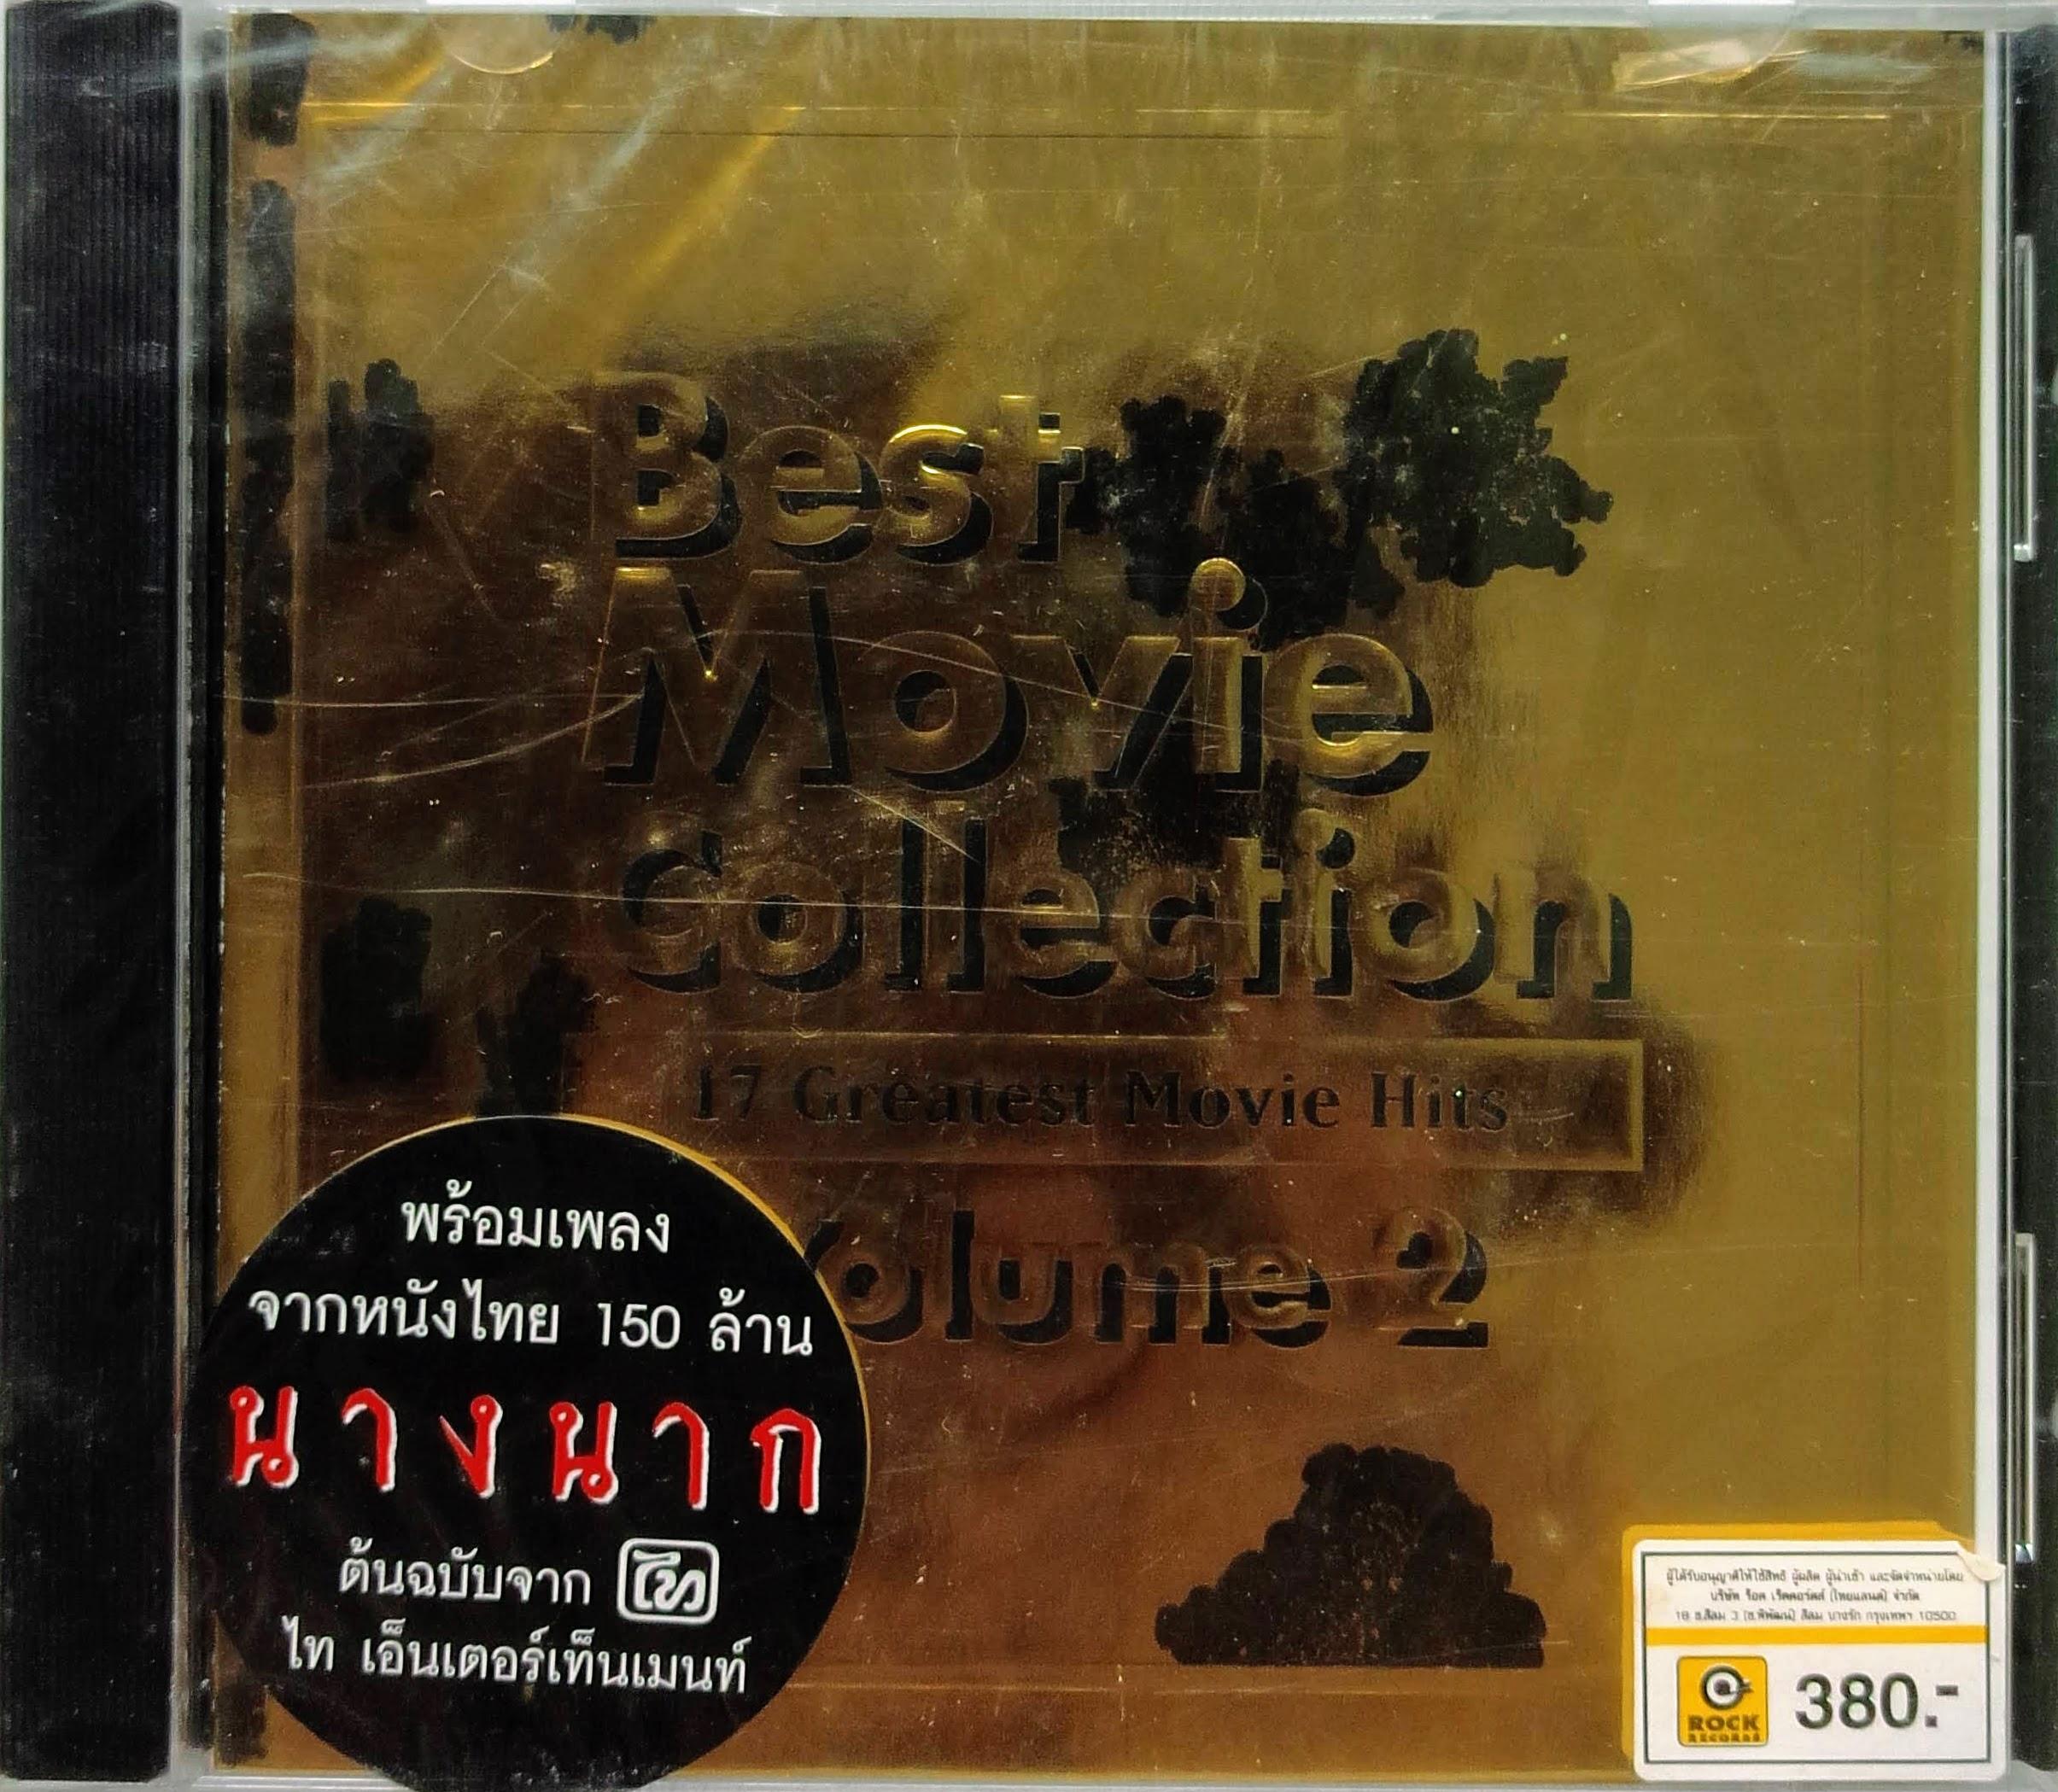 CD Various Artists - Best of Movie Collection Volume 2 : 17 Greatest Movie Hits